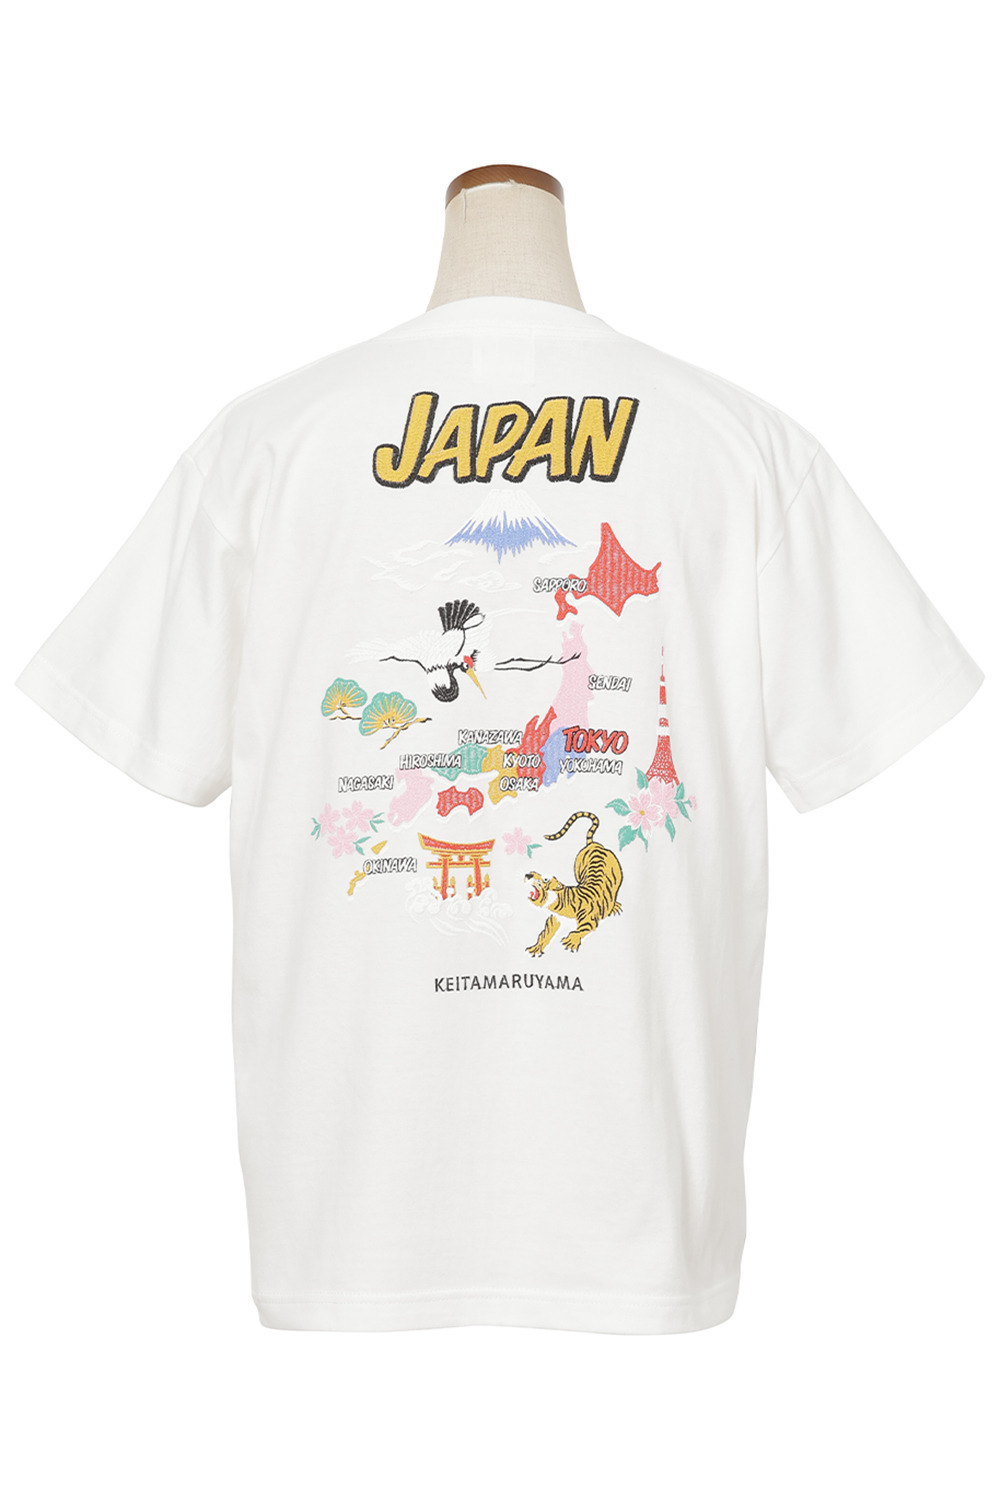 JAPAN Embroidery Style Print Tシャツ 詳細画像 ホワイト 2